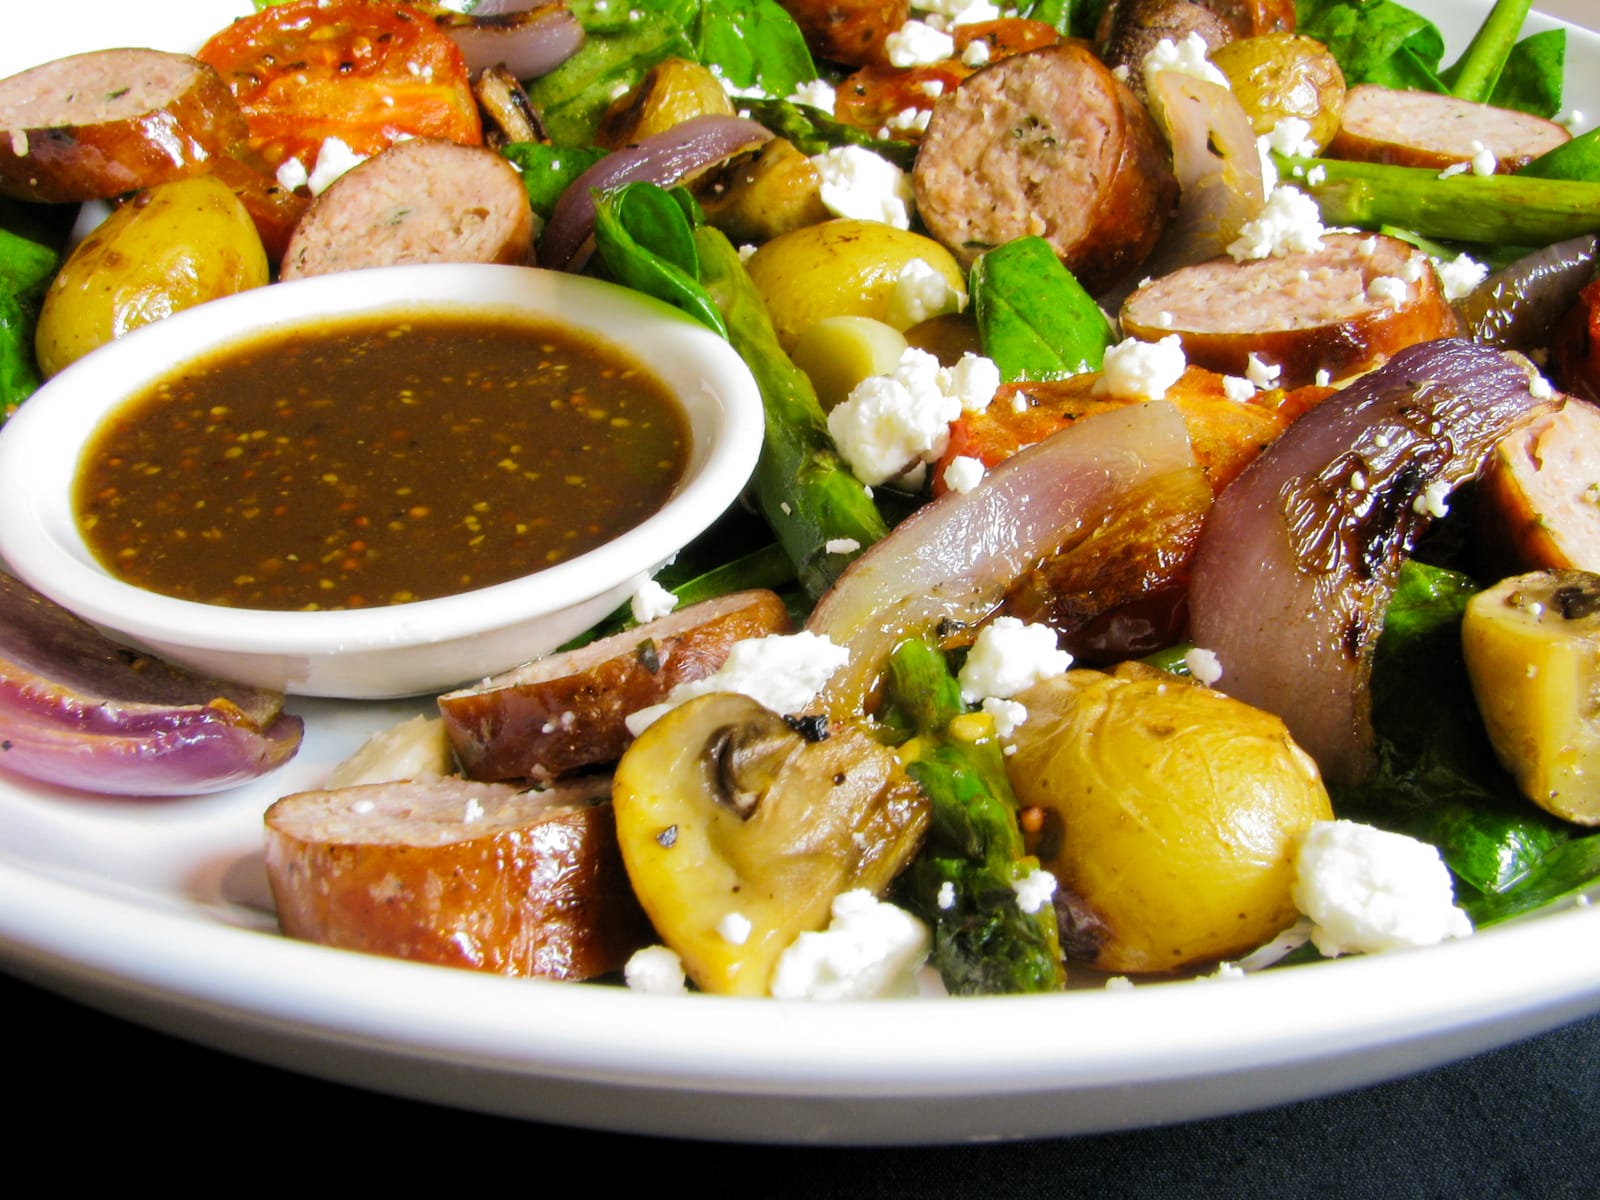 Warm Spinach Salad with Sausage and Potatoes